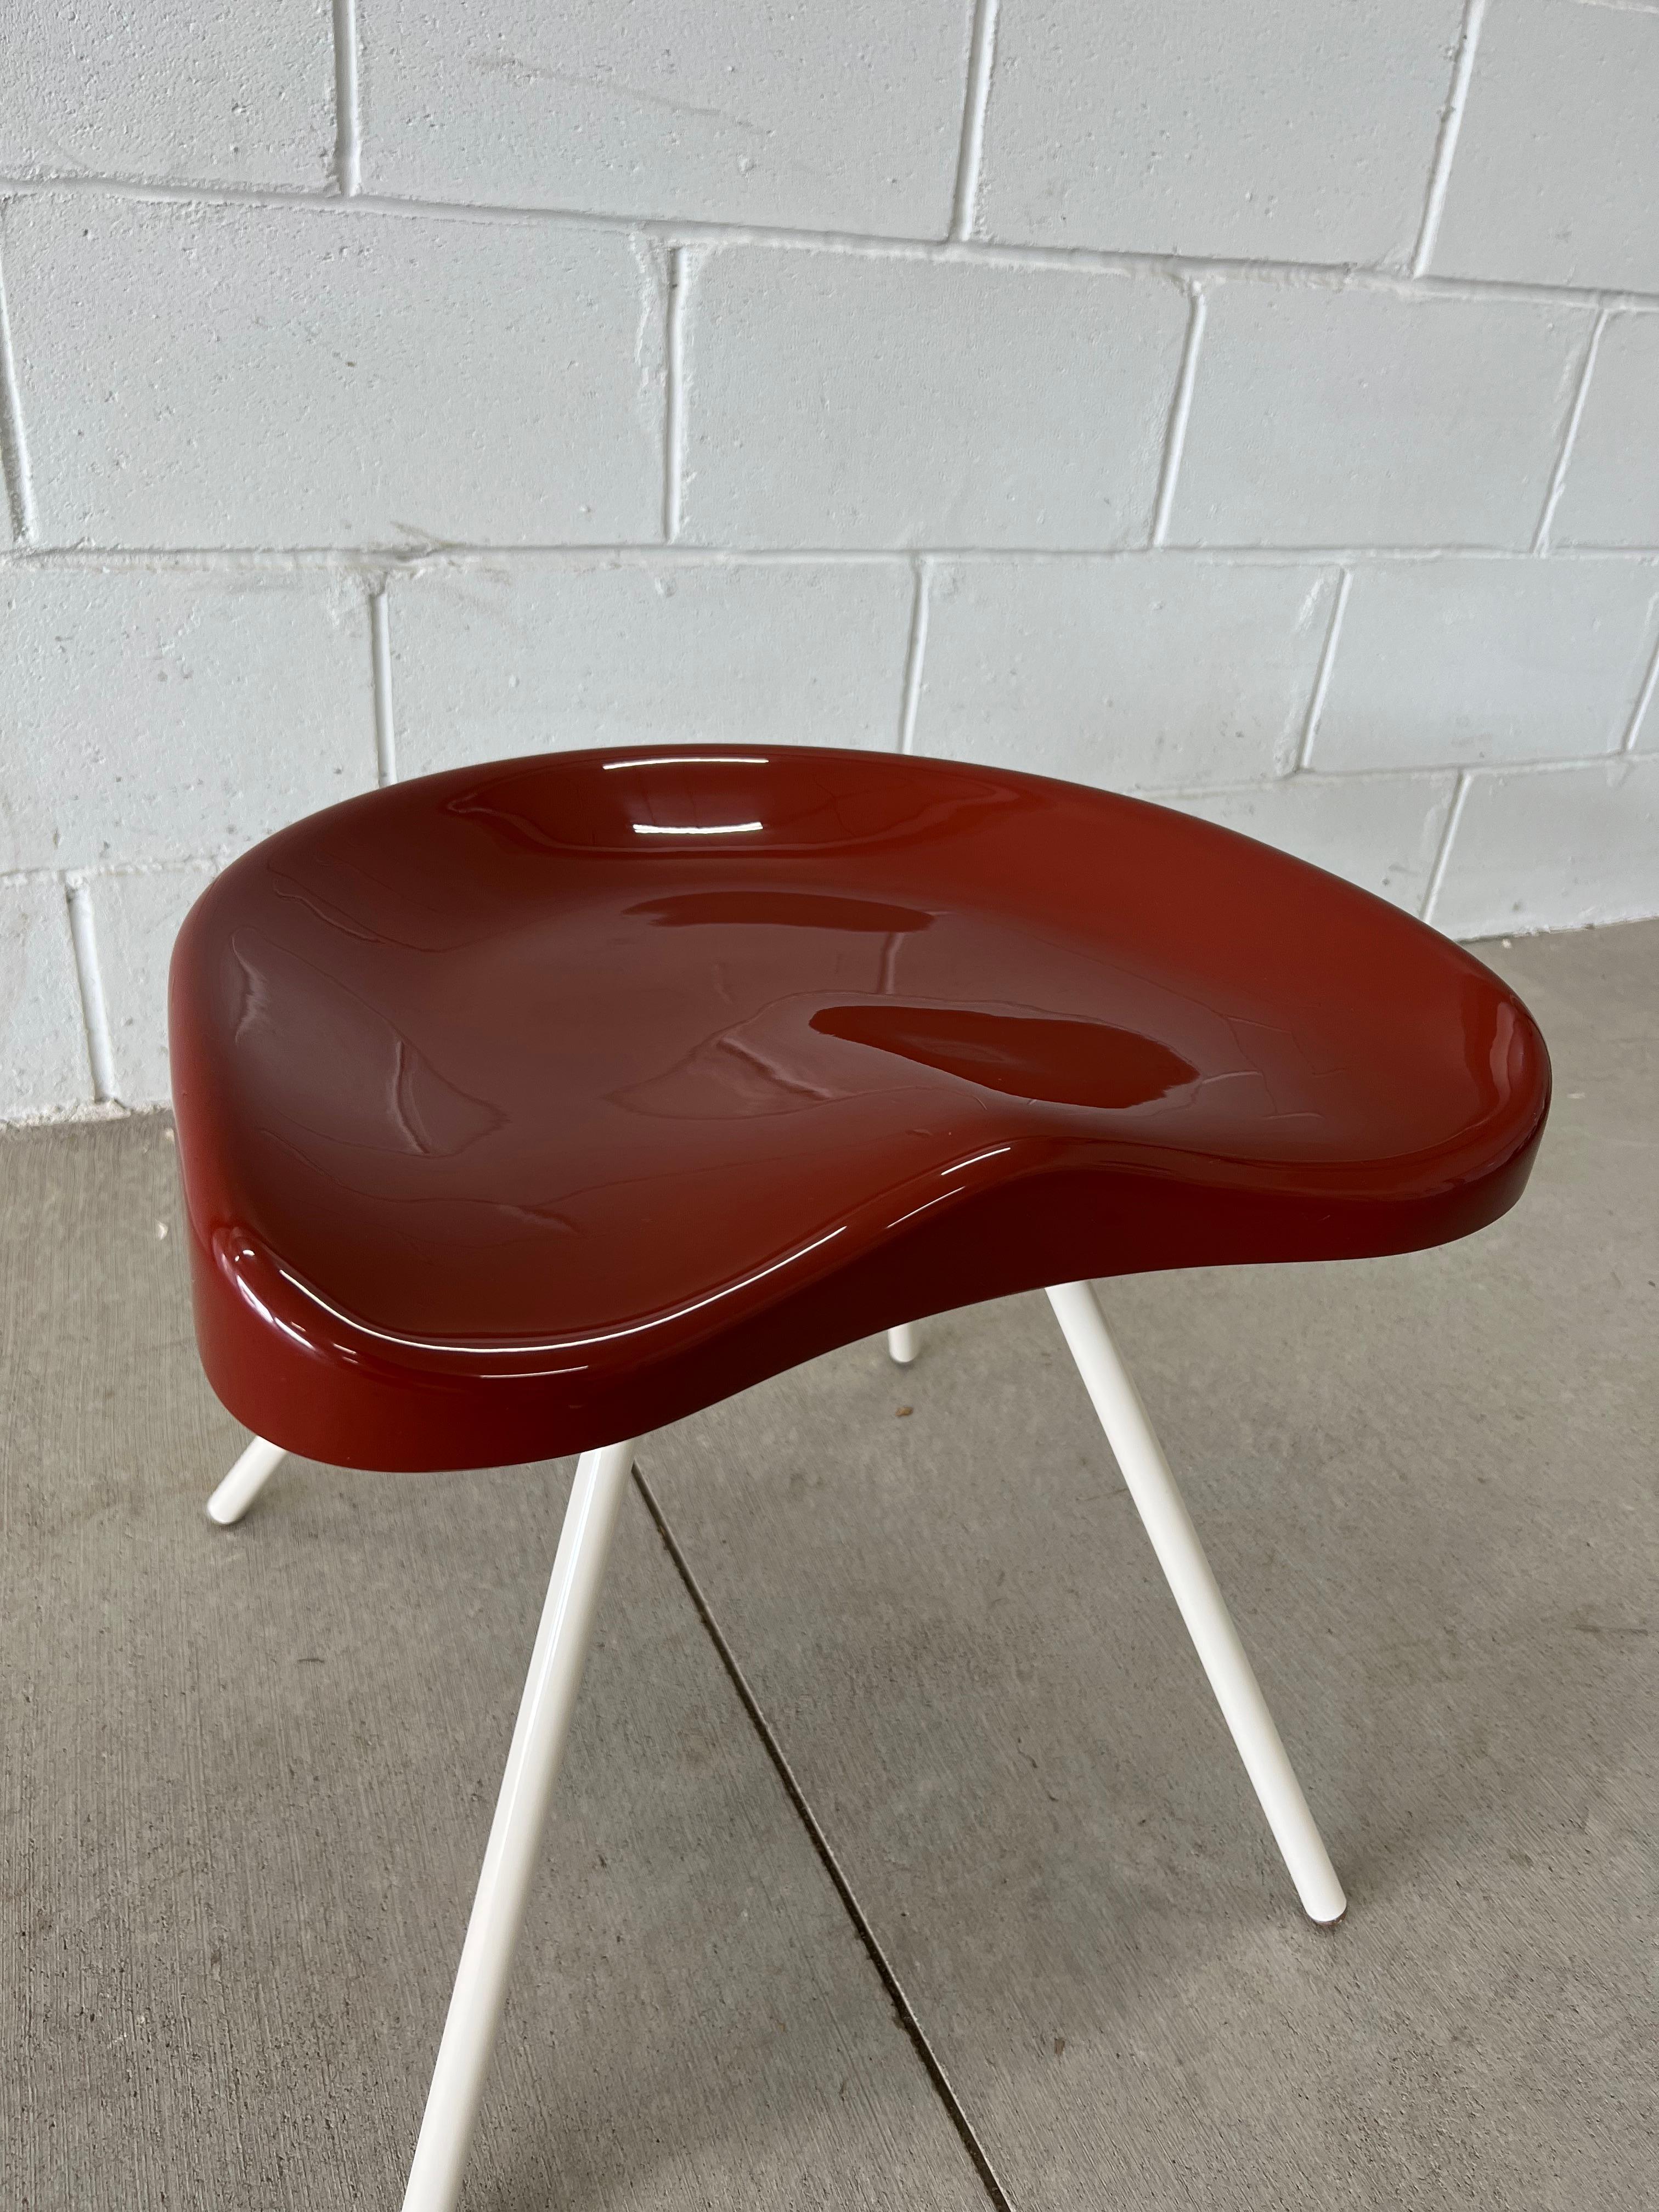 Prouvé Raw Tabouret 307 Stool by Jean Prouvé and G Star Raw for Vitra In Good Condition For Sale In Saint Paul, MN